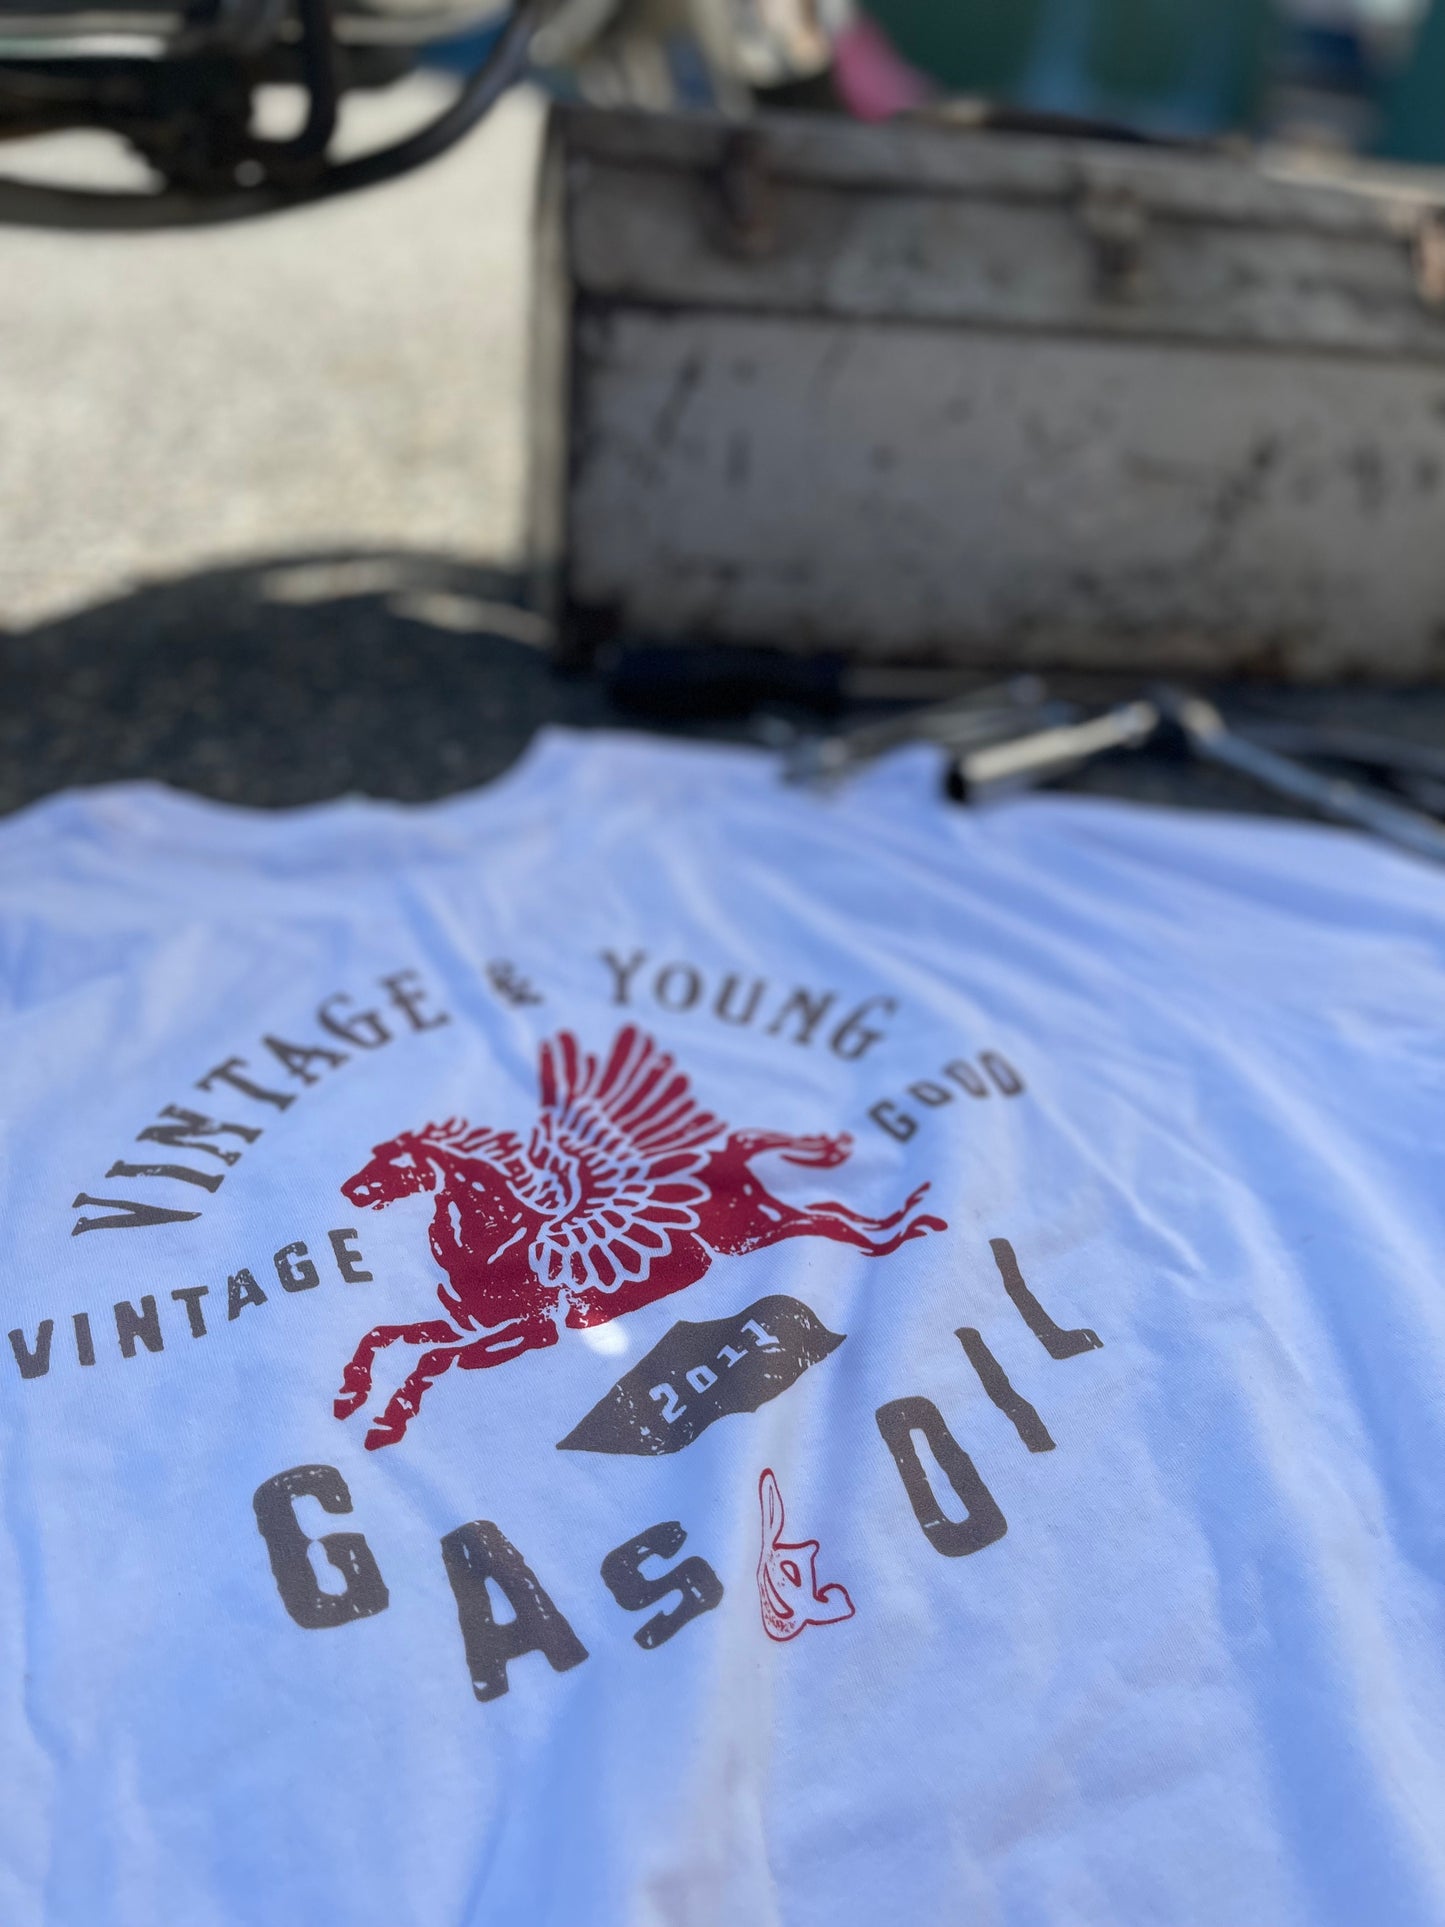 Vintage Gas and Oil Tee